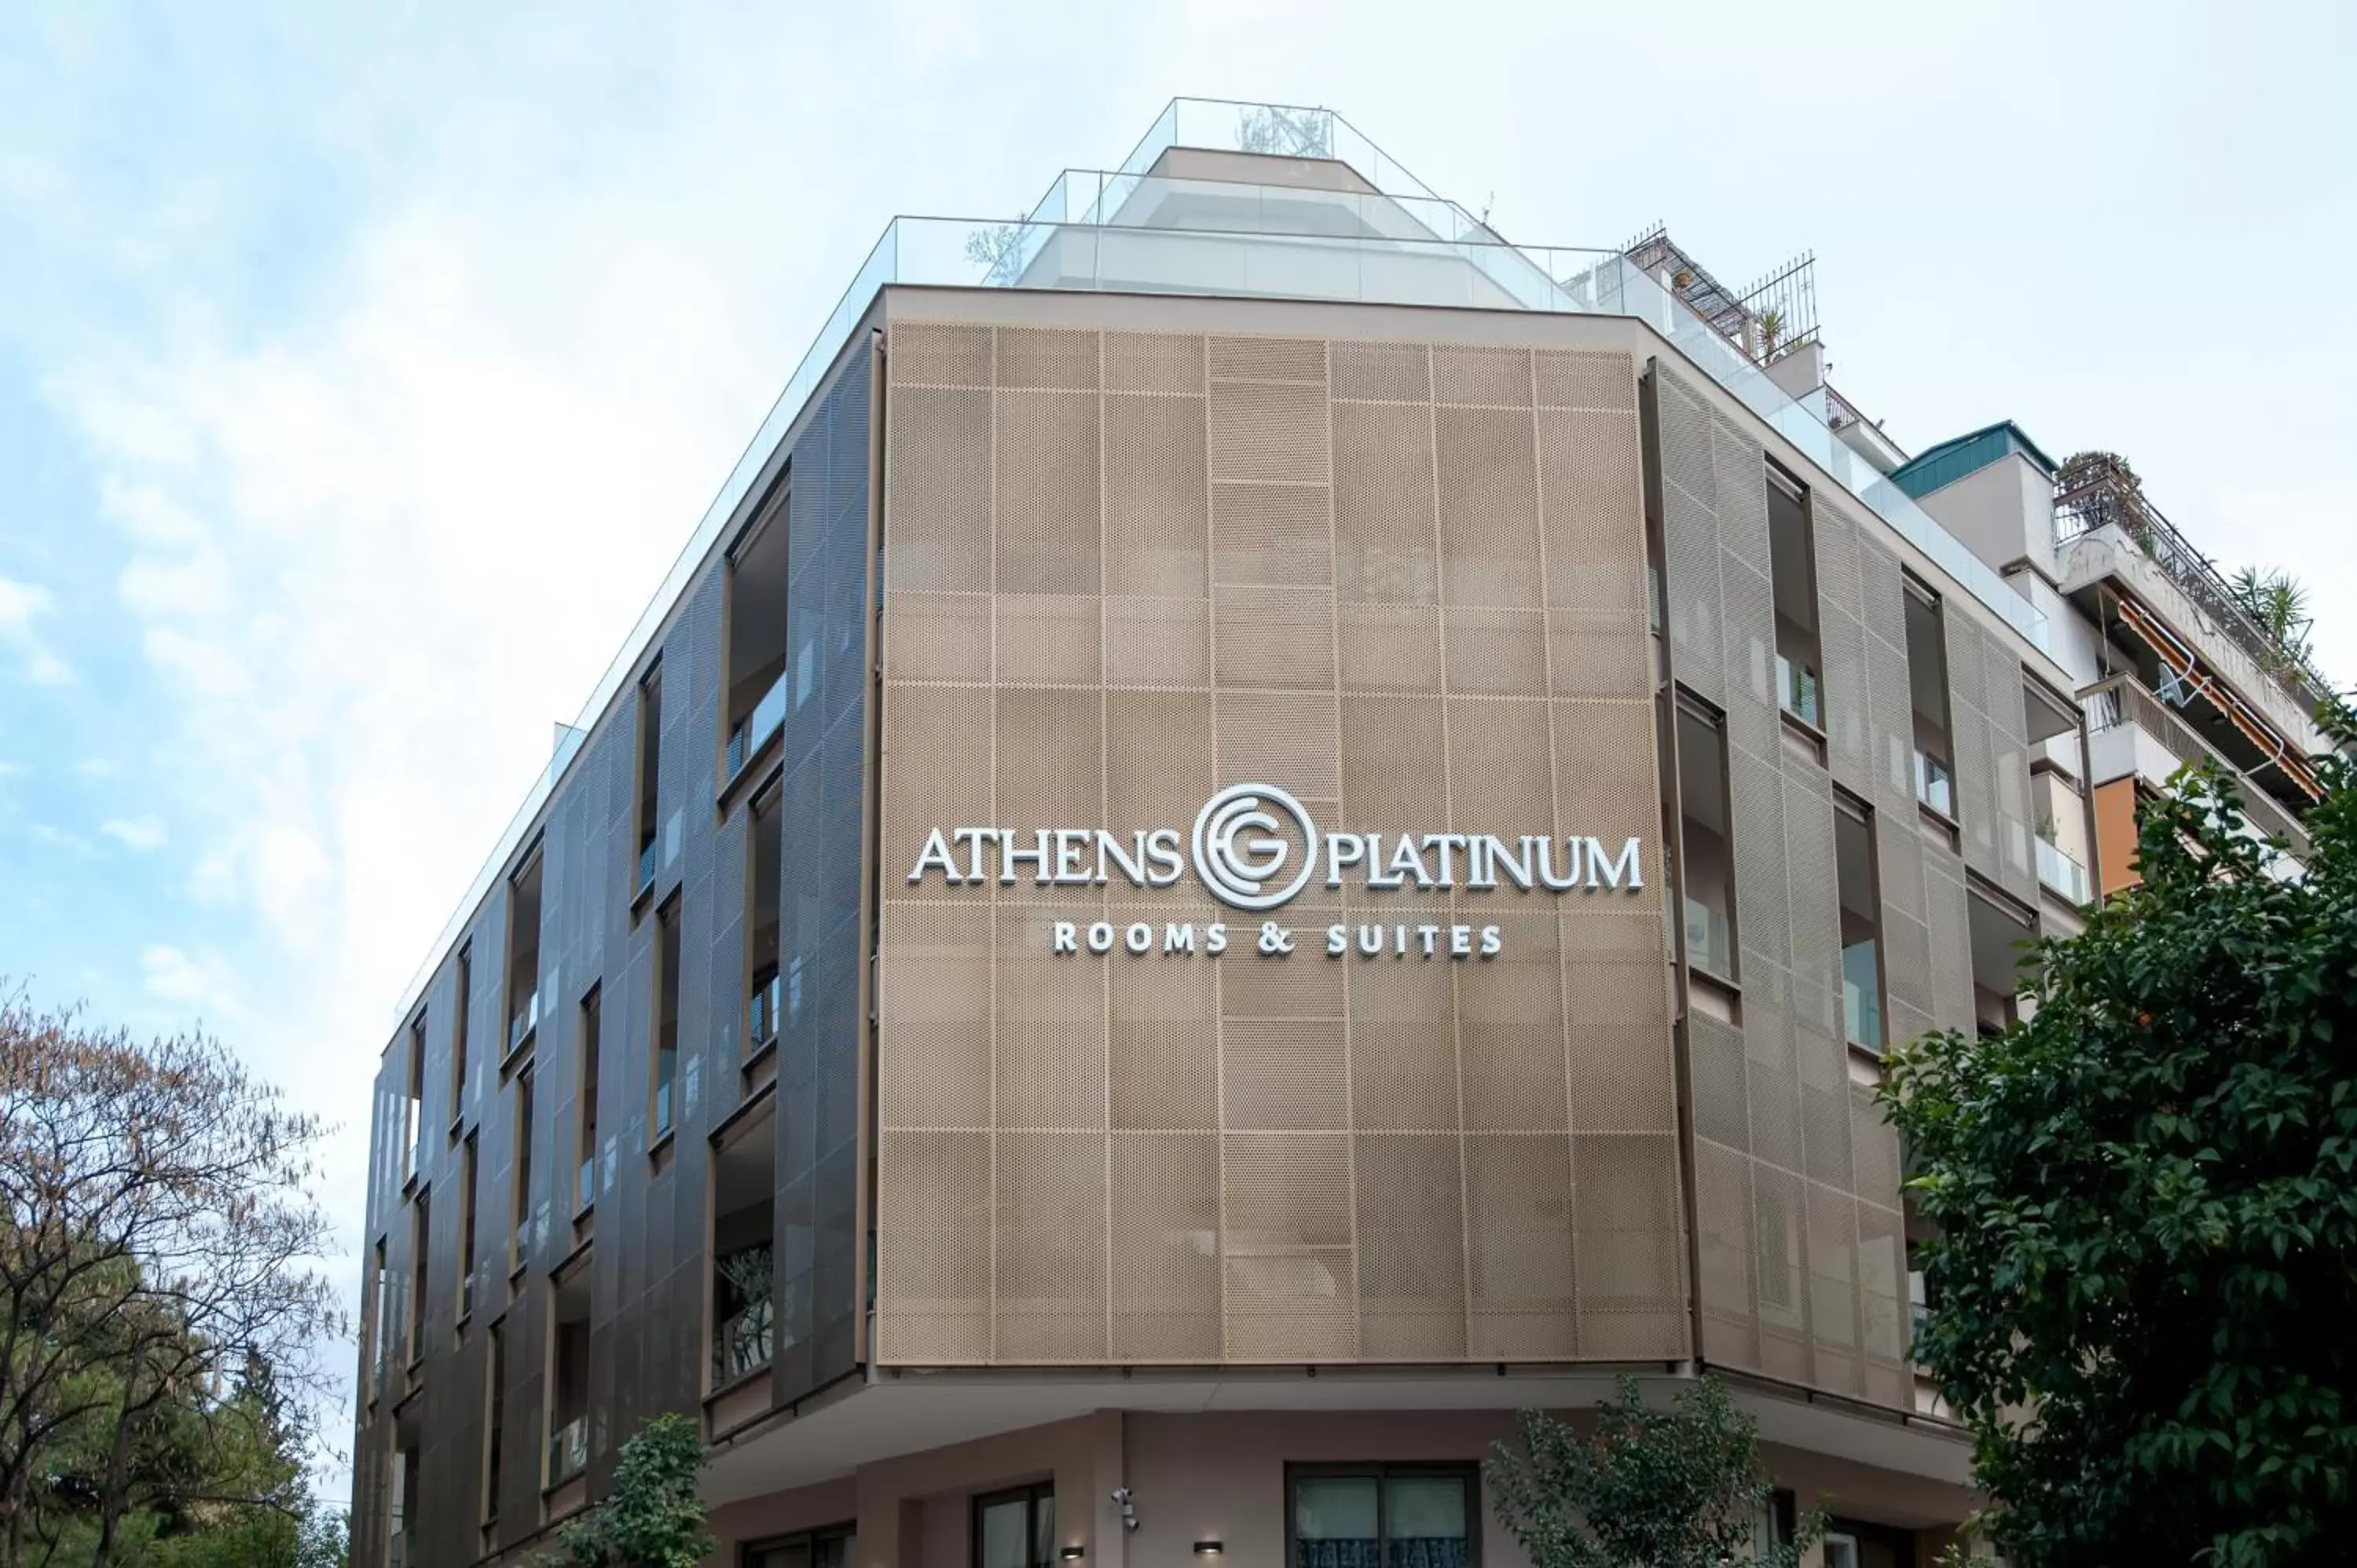 Property Building in Athens Platinum Rooms and Suites